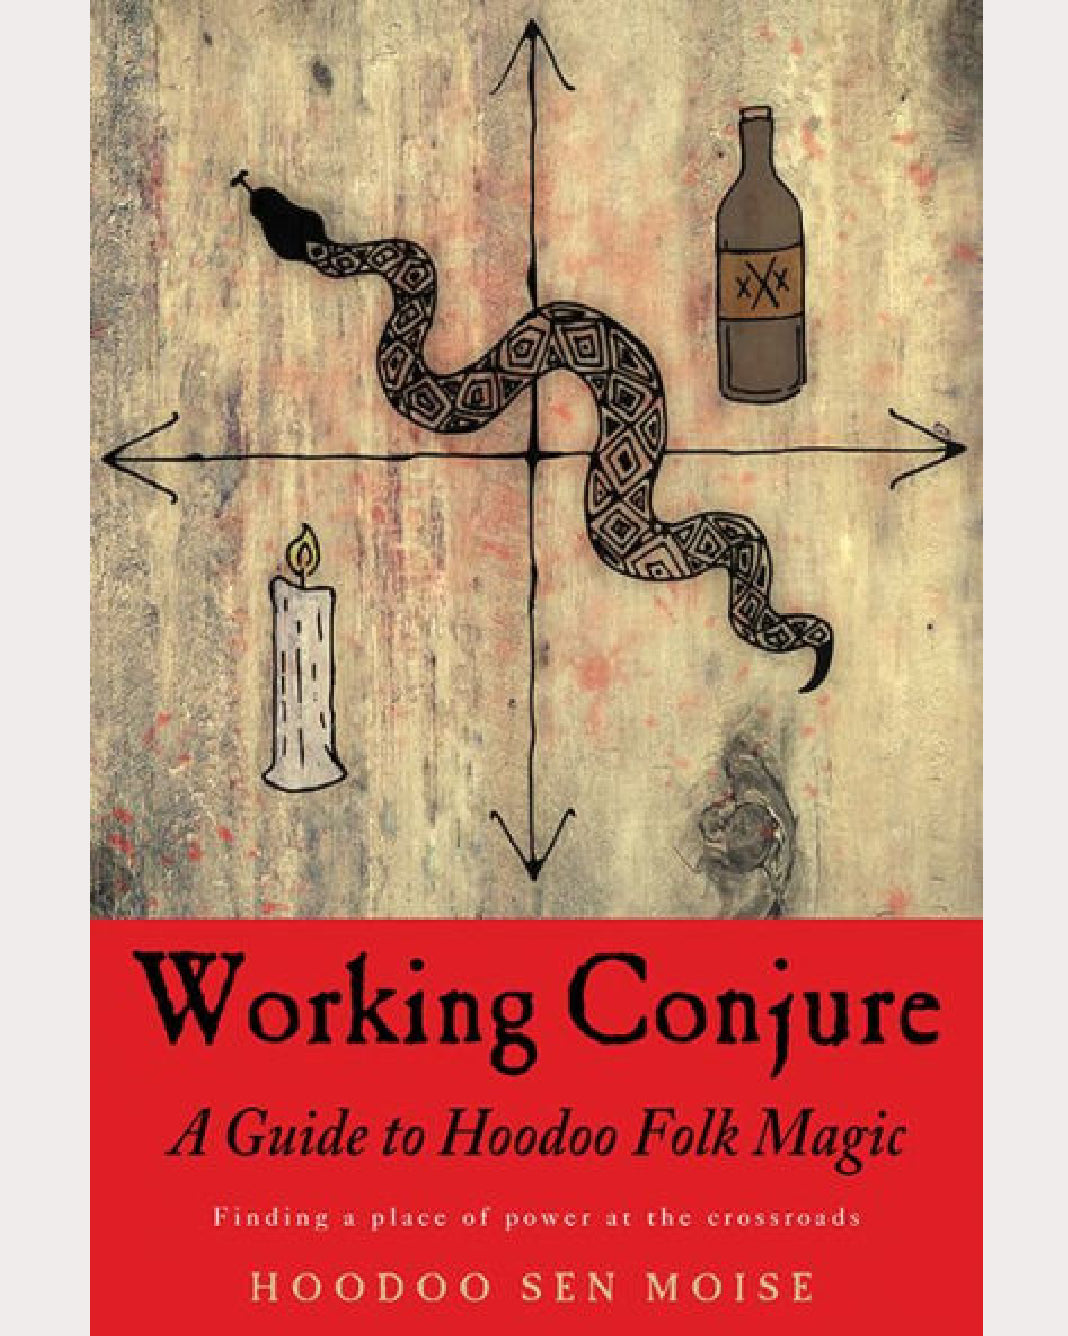 Working Conjure